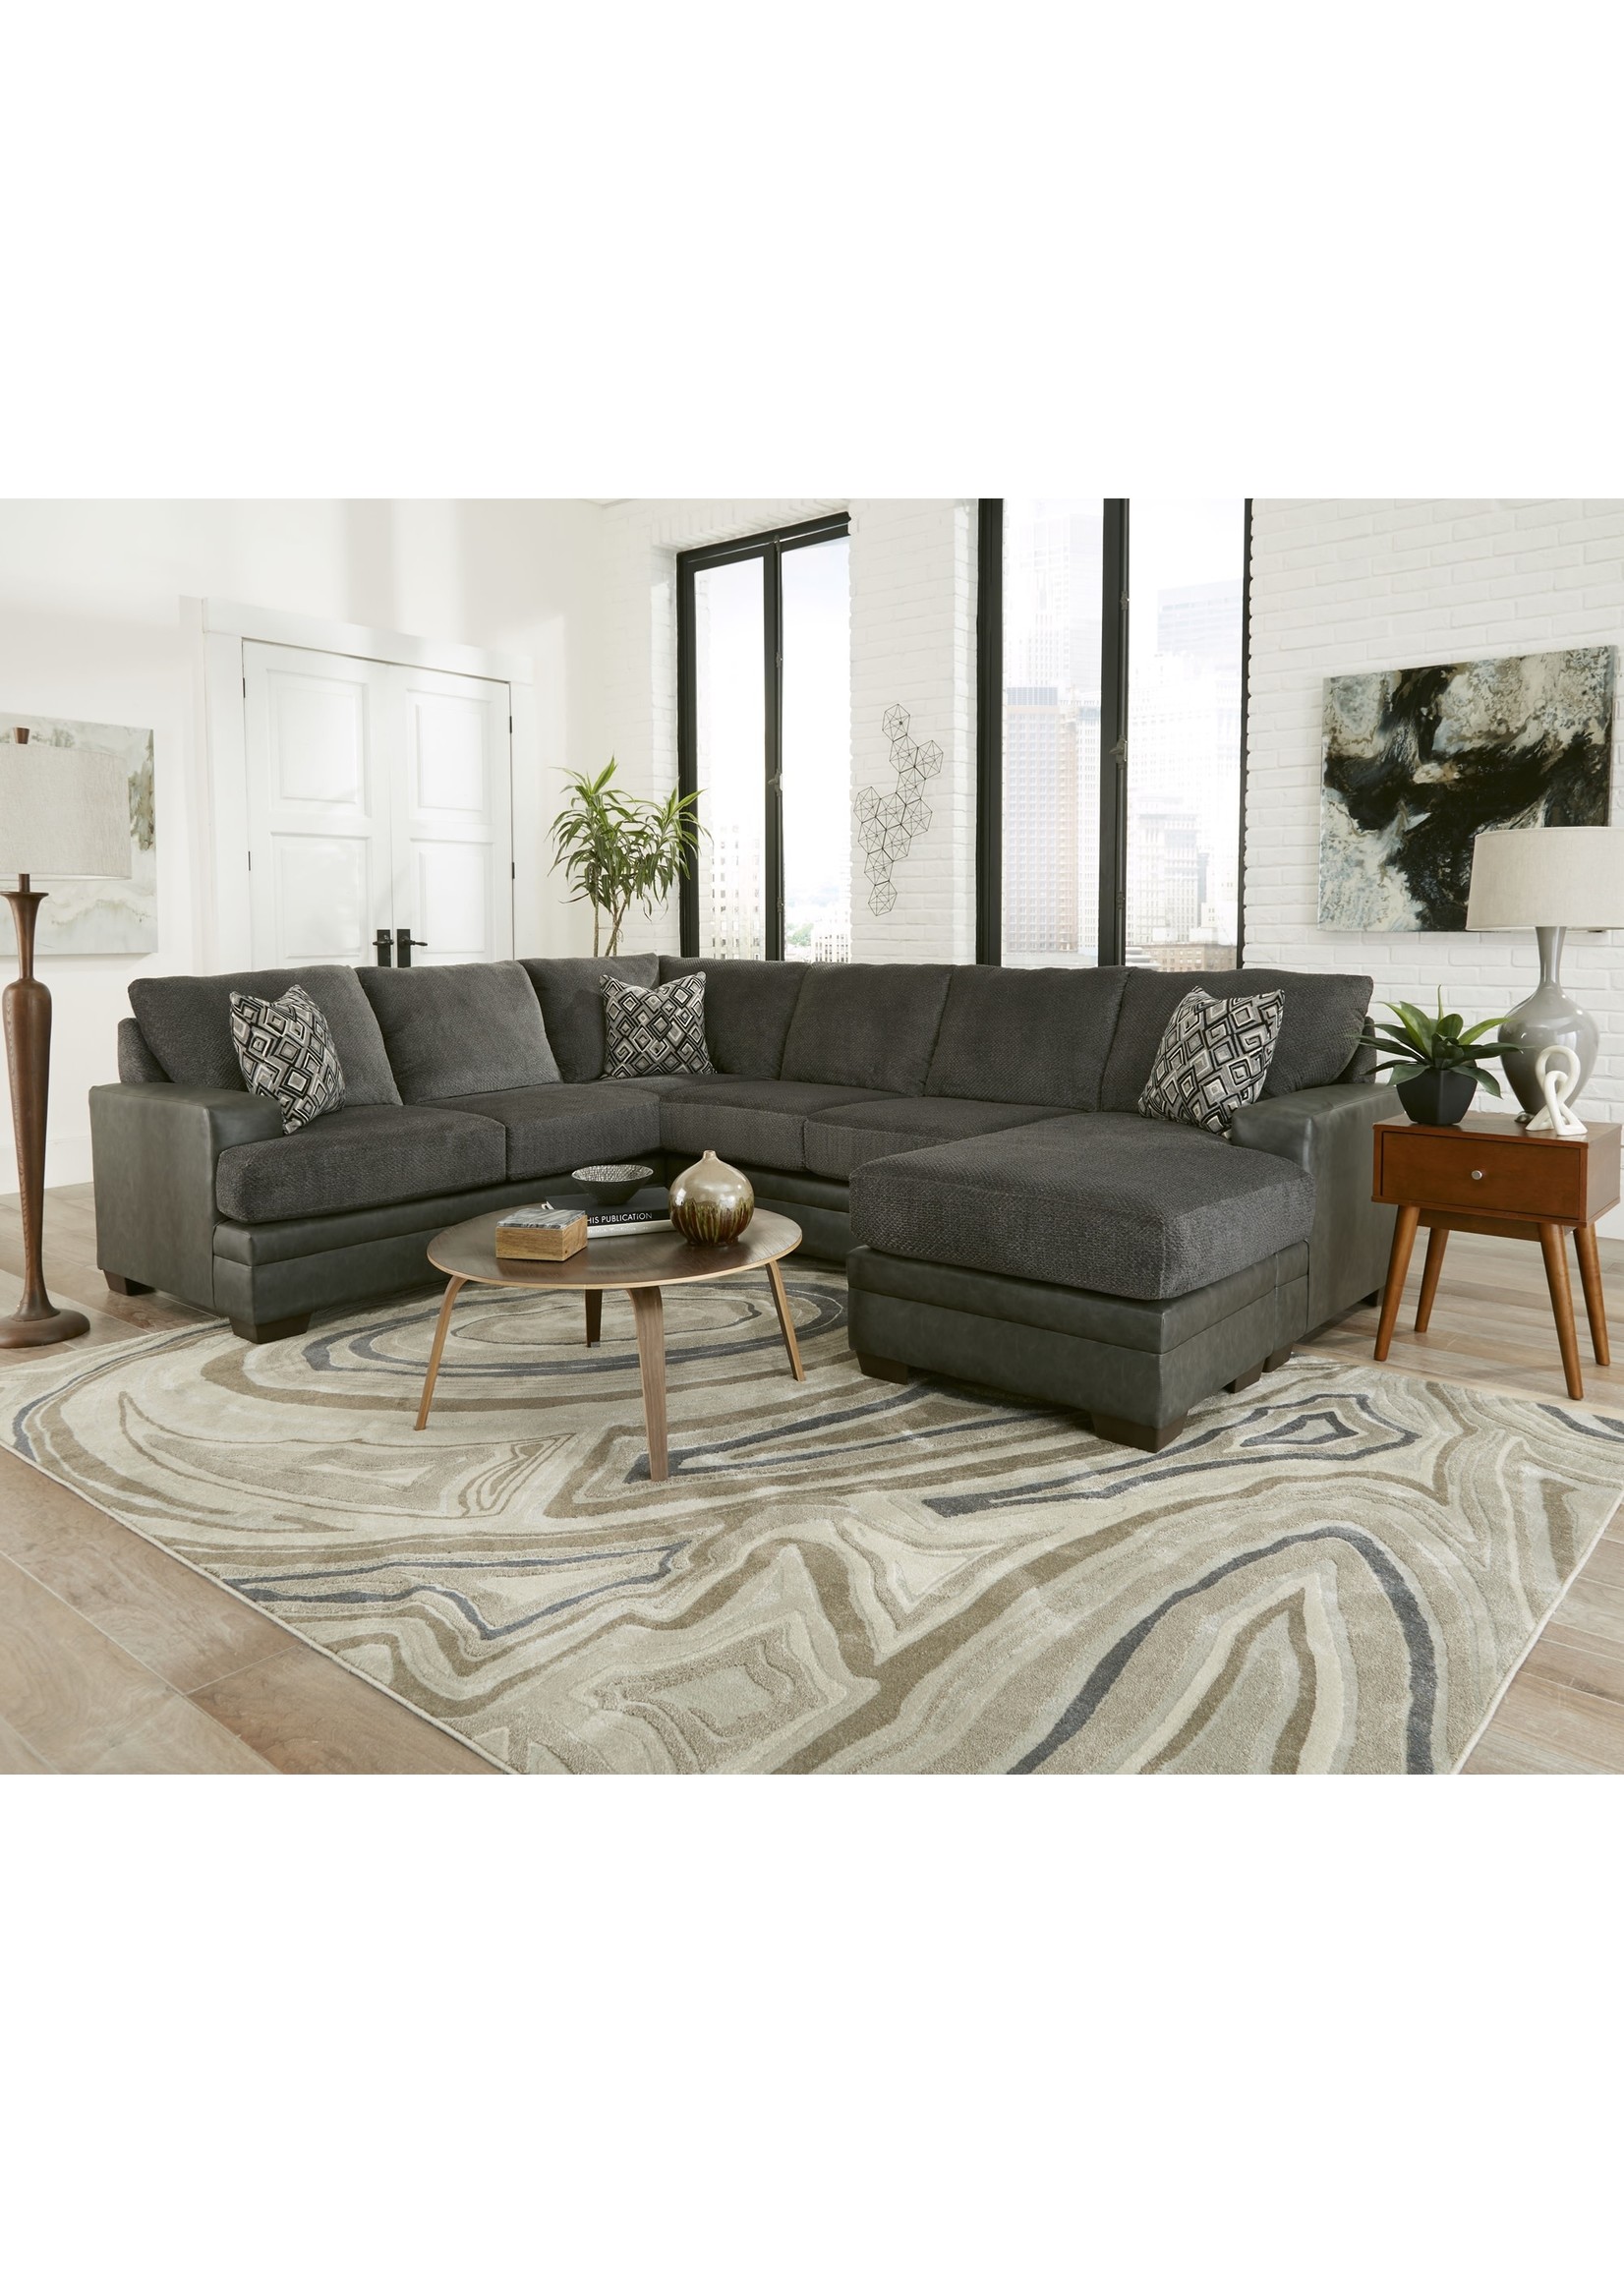 DELTA 2720 STALLION CHARCOAL COMBO SECTIONAL